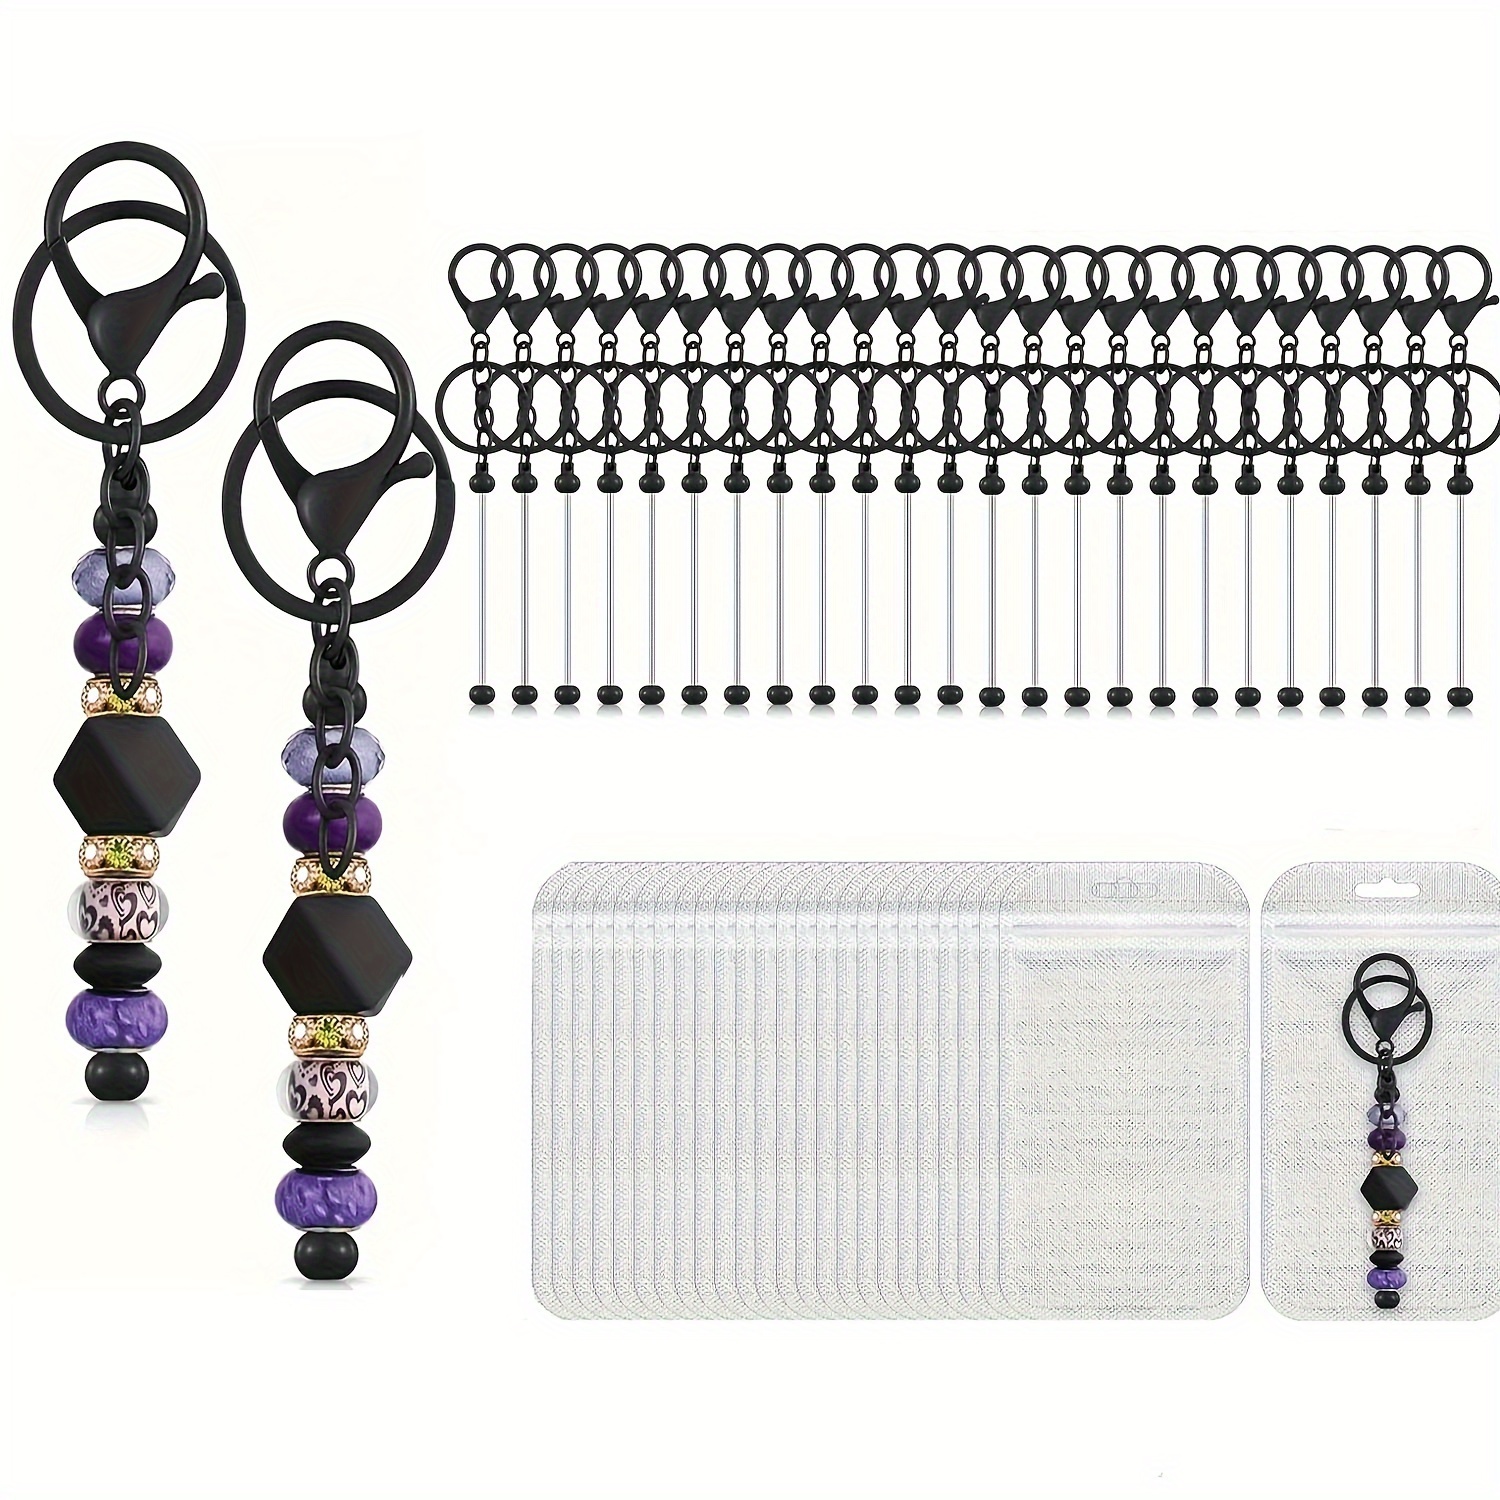 

48pcs Black Metal Beaded Keychain Making Kit With Lobster Clasps, 4-section Chains, Jump Rings & Blank Rods - Diy Jewelry Crafting Set Pendants For Jewelry Making Jewelry Making Kit